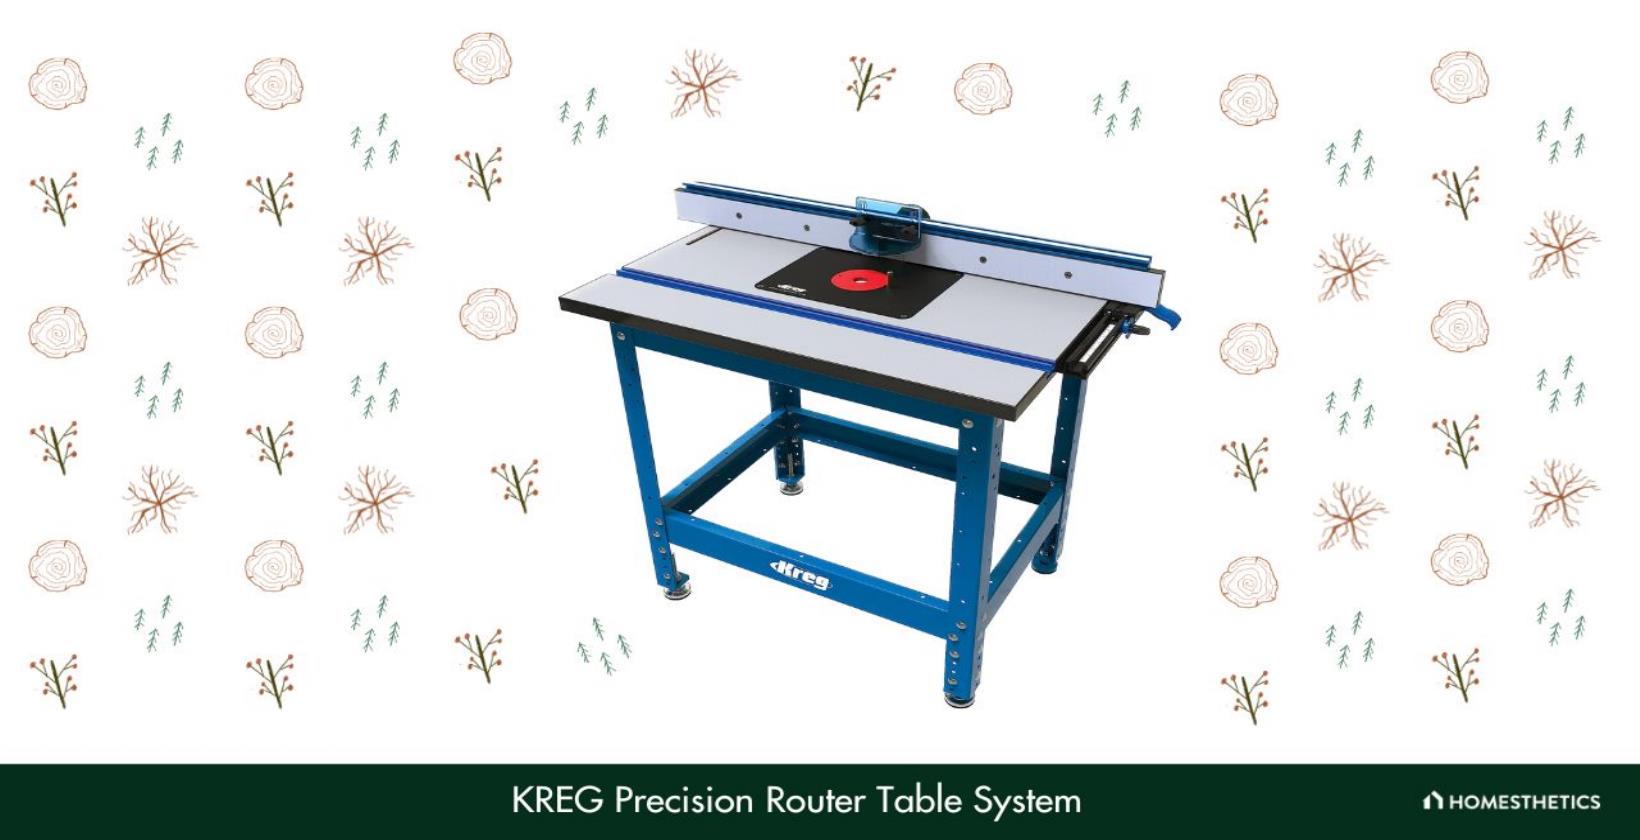 3. KREG Precision Router Table System